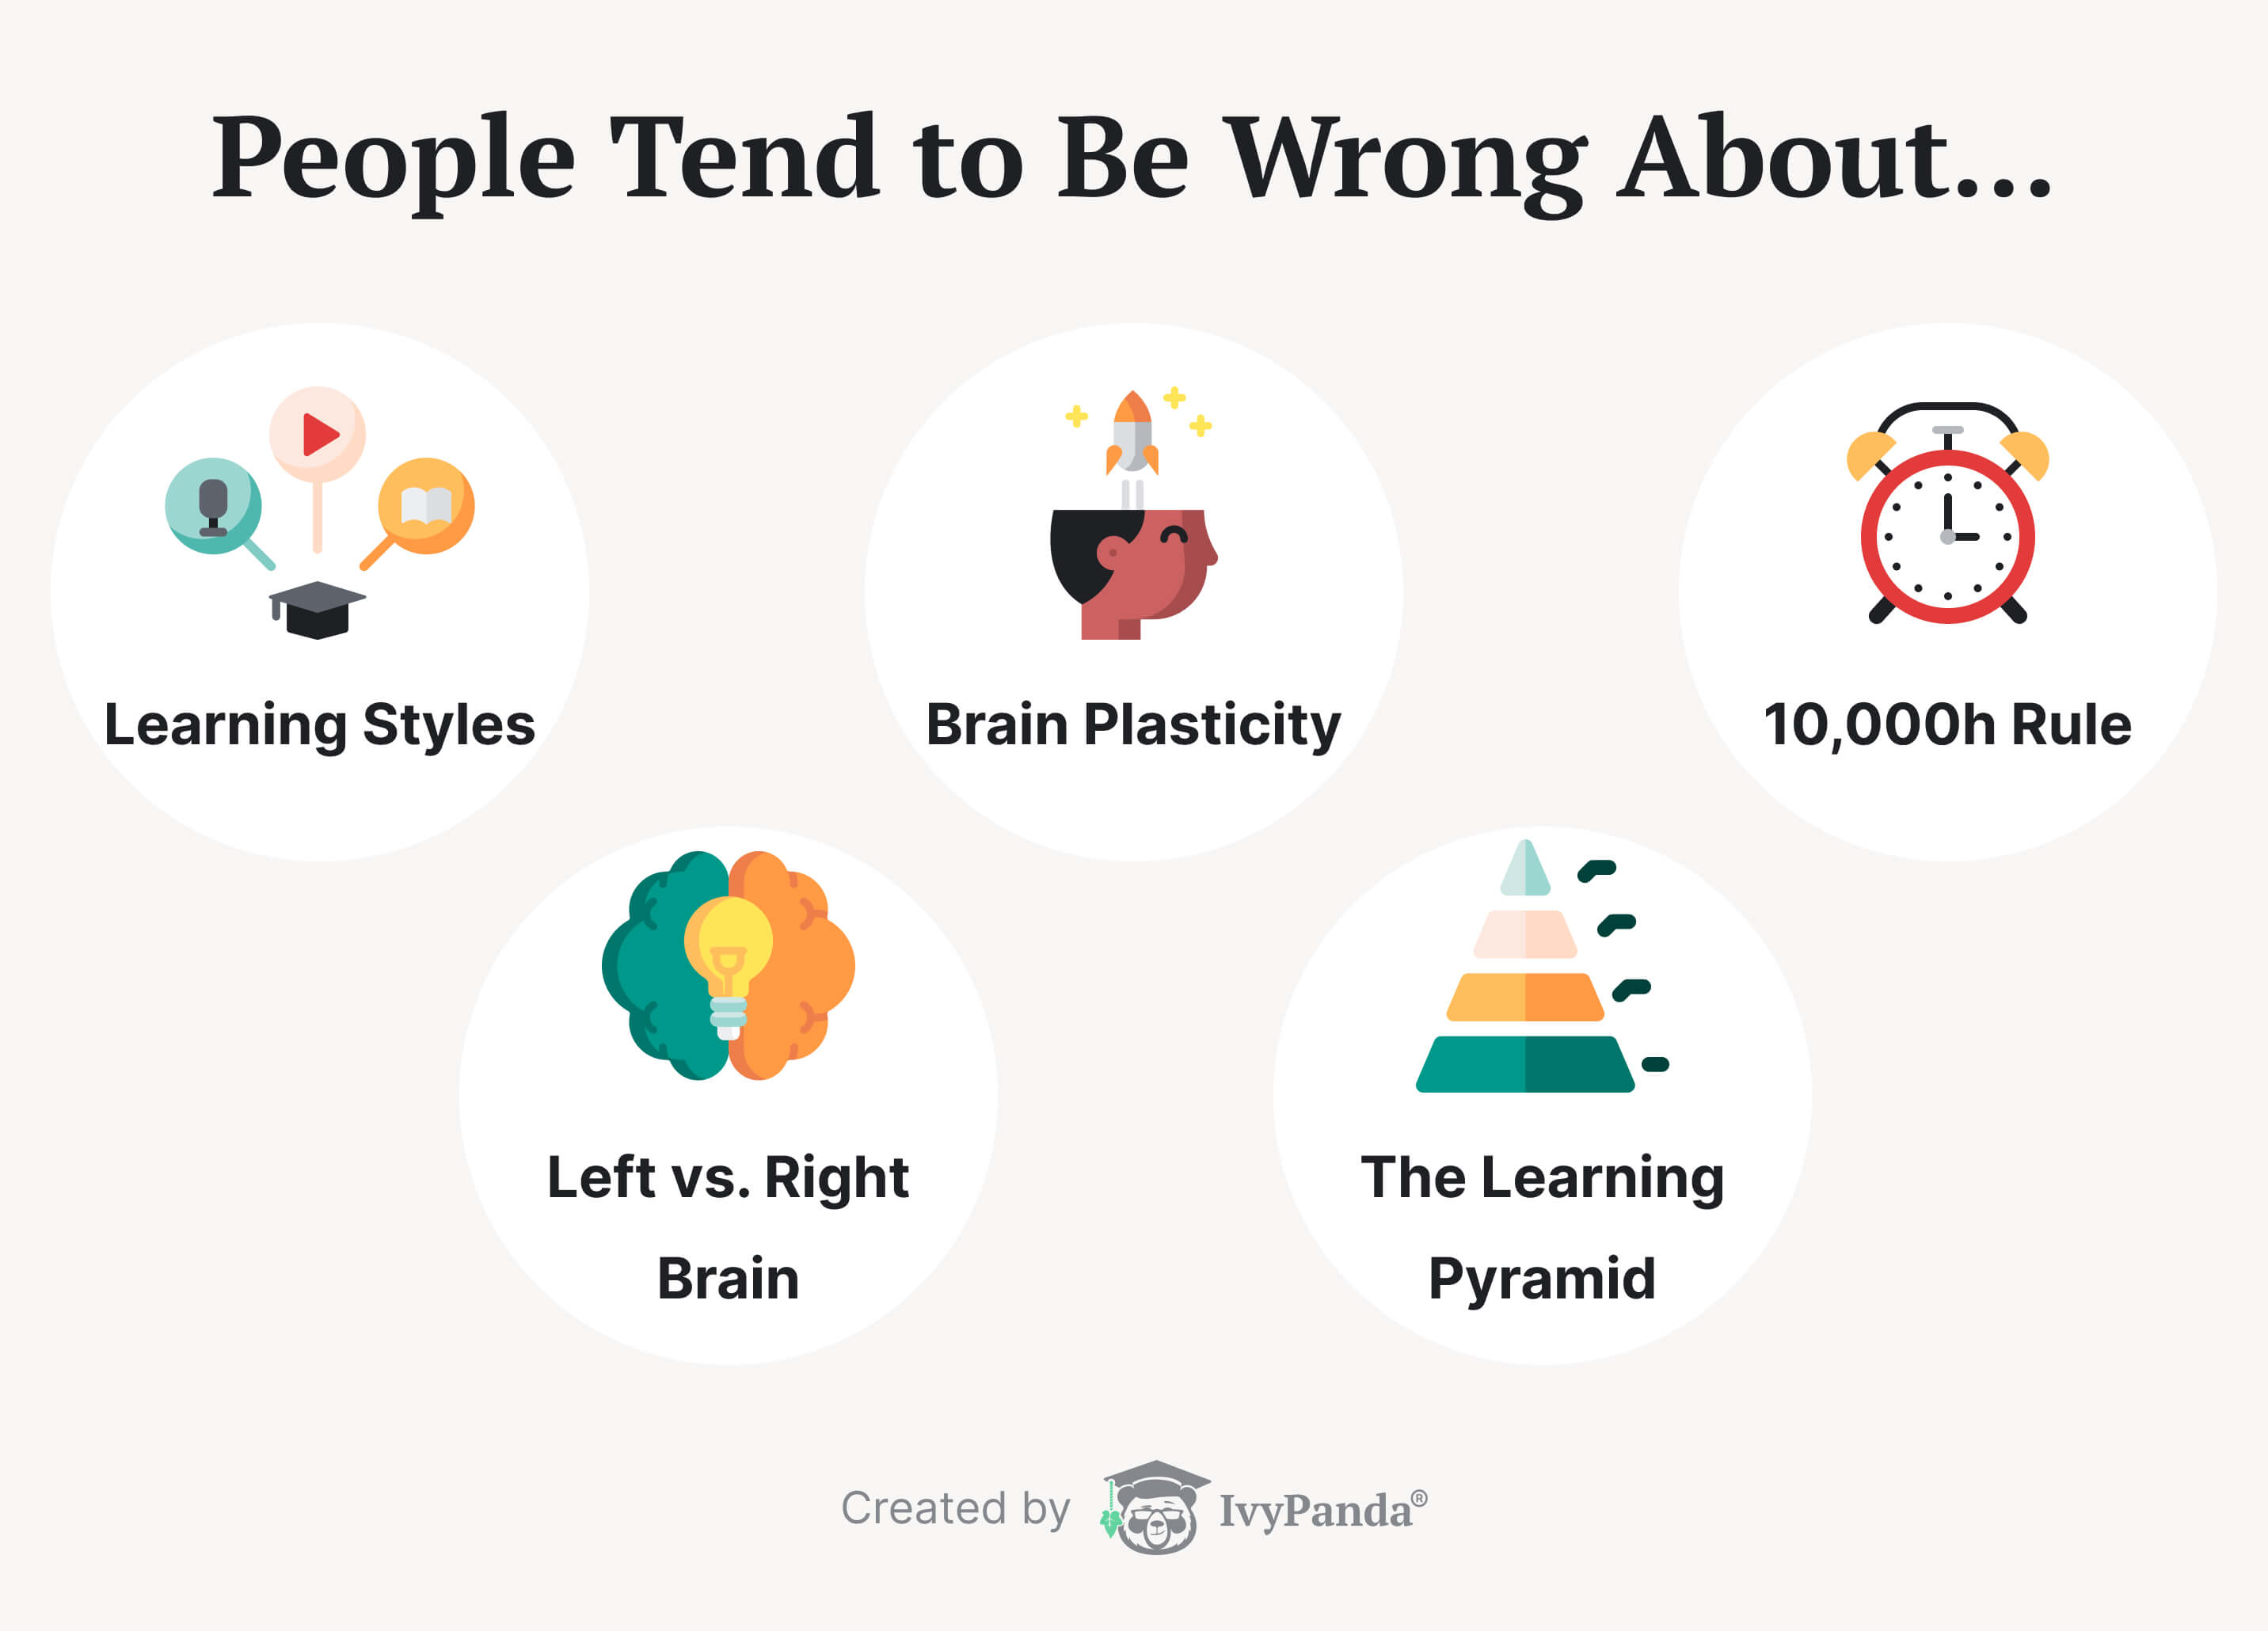 The most popular learning myths that people are wrong about.